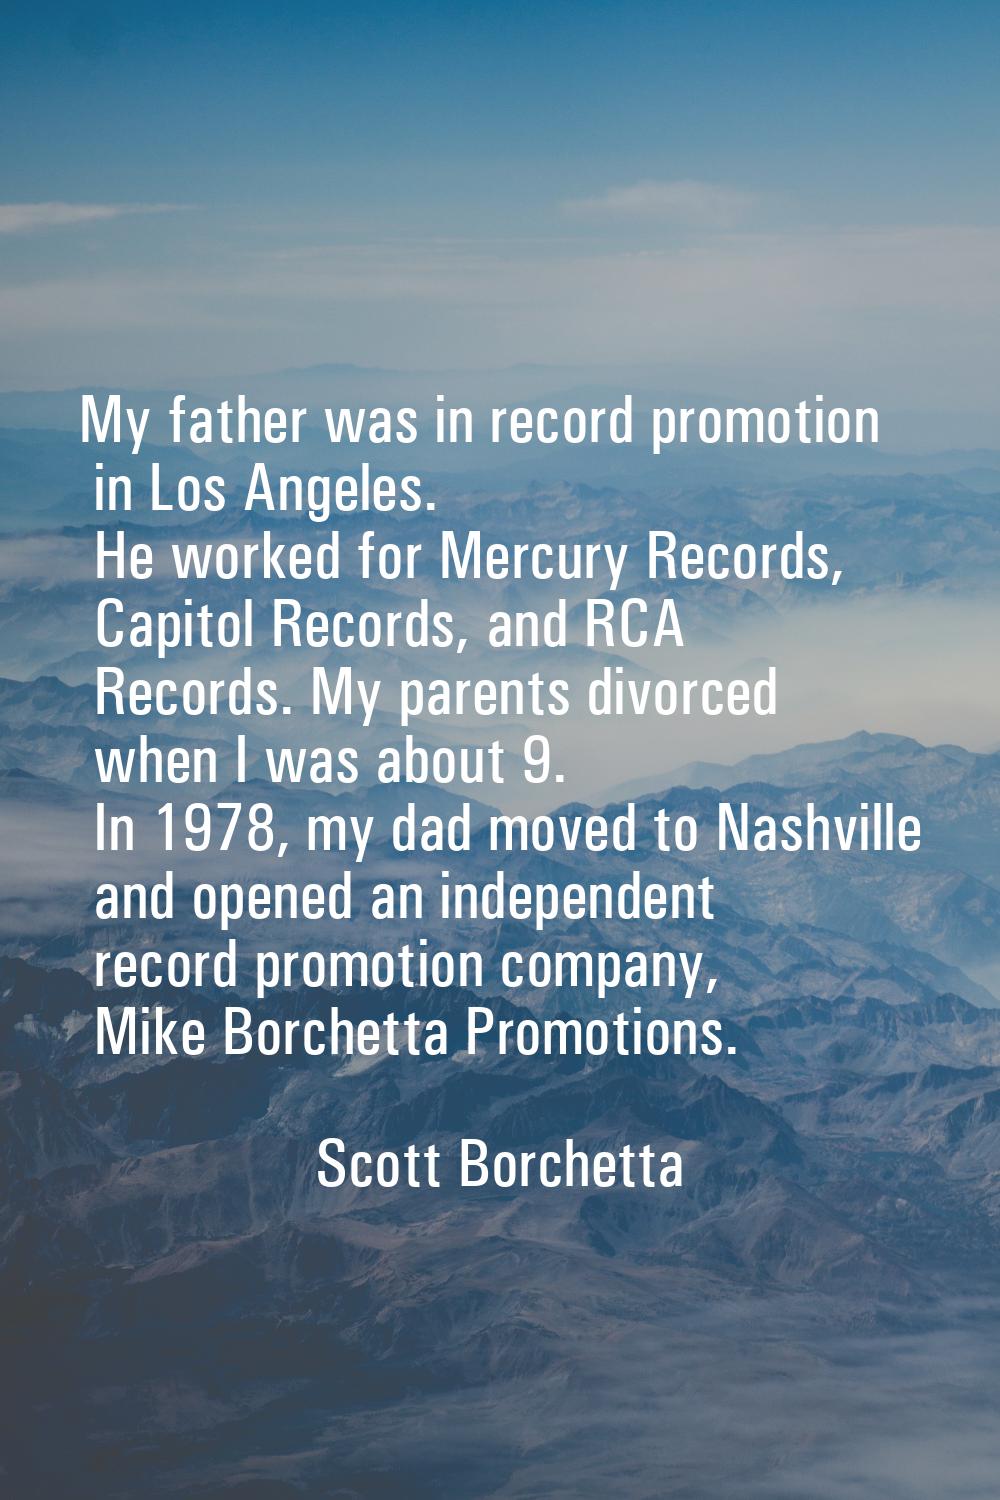 My father was in record promotion in Los Angeles. He worked for Mercury Records, Capitol Records, a